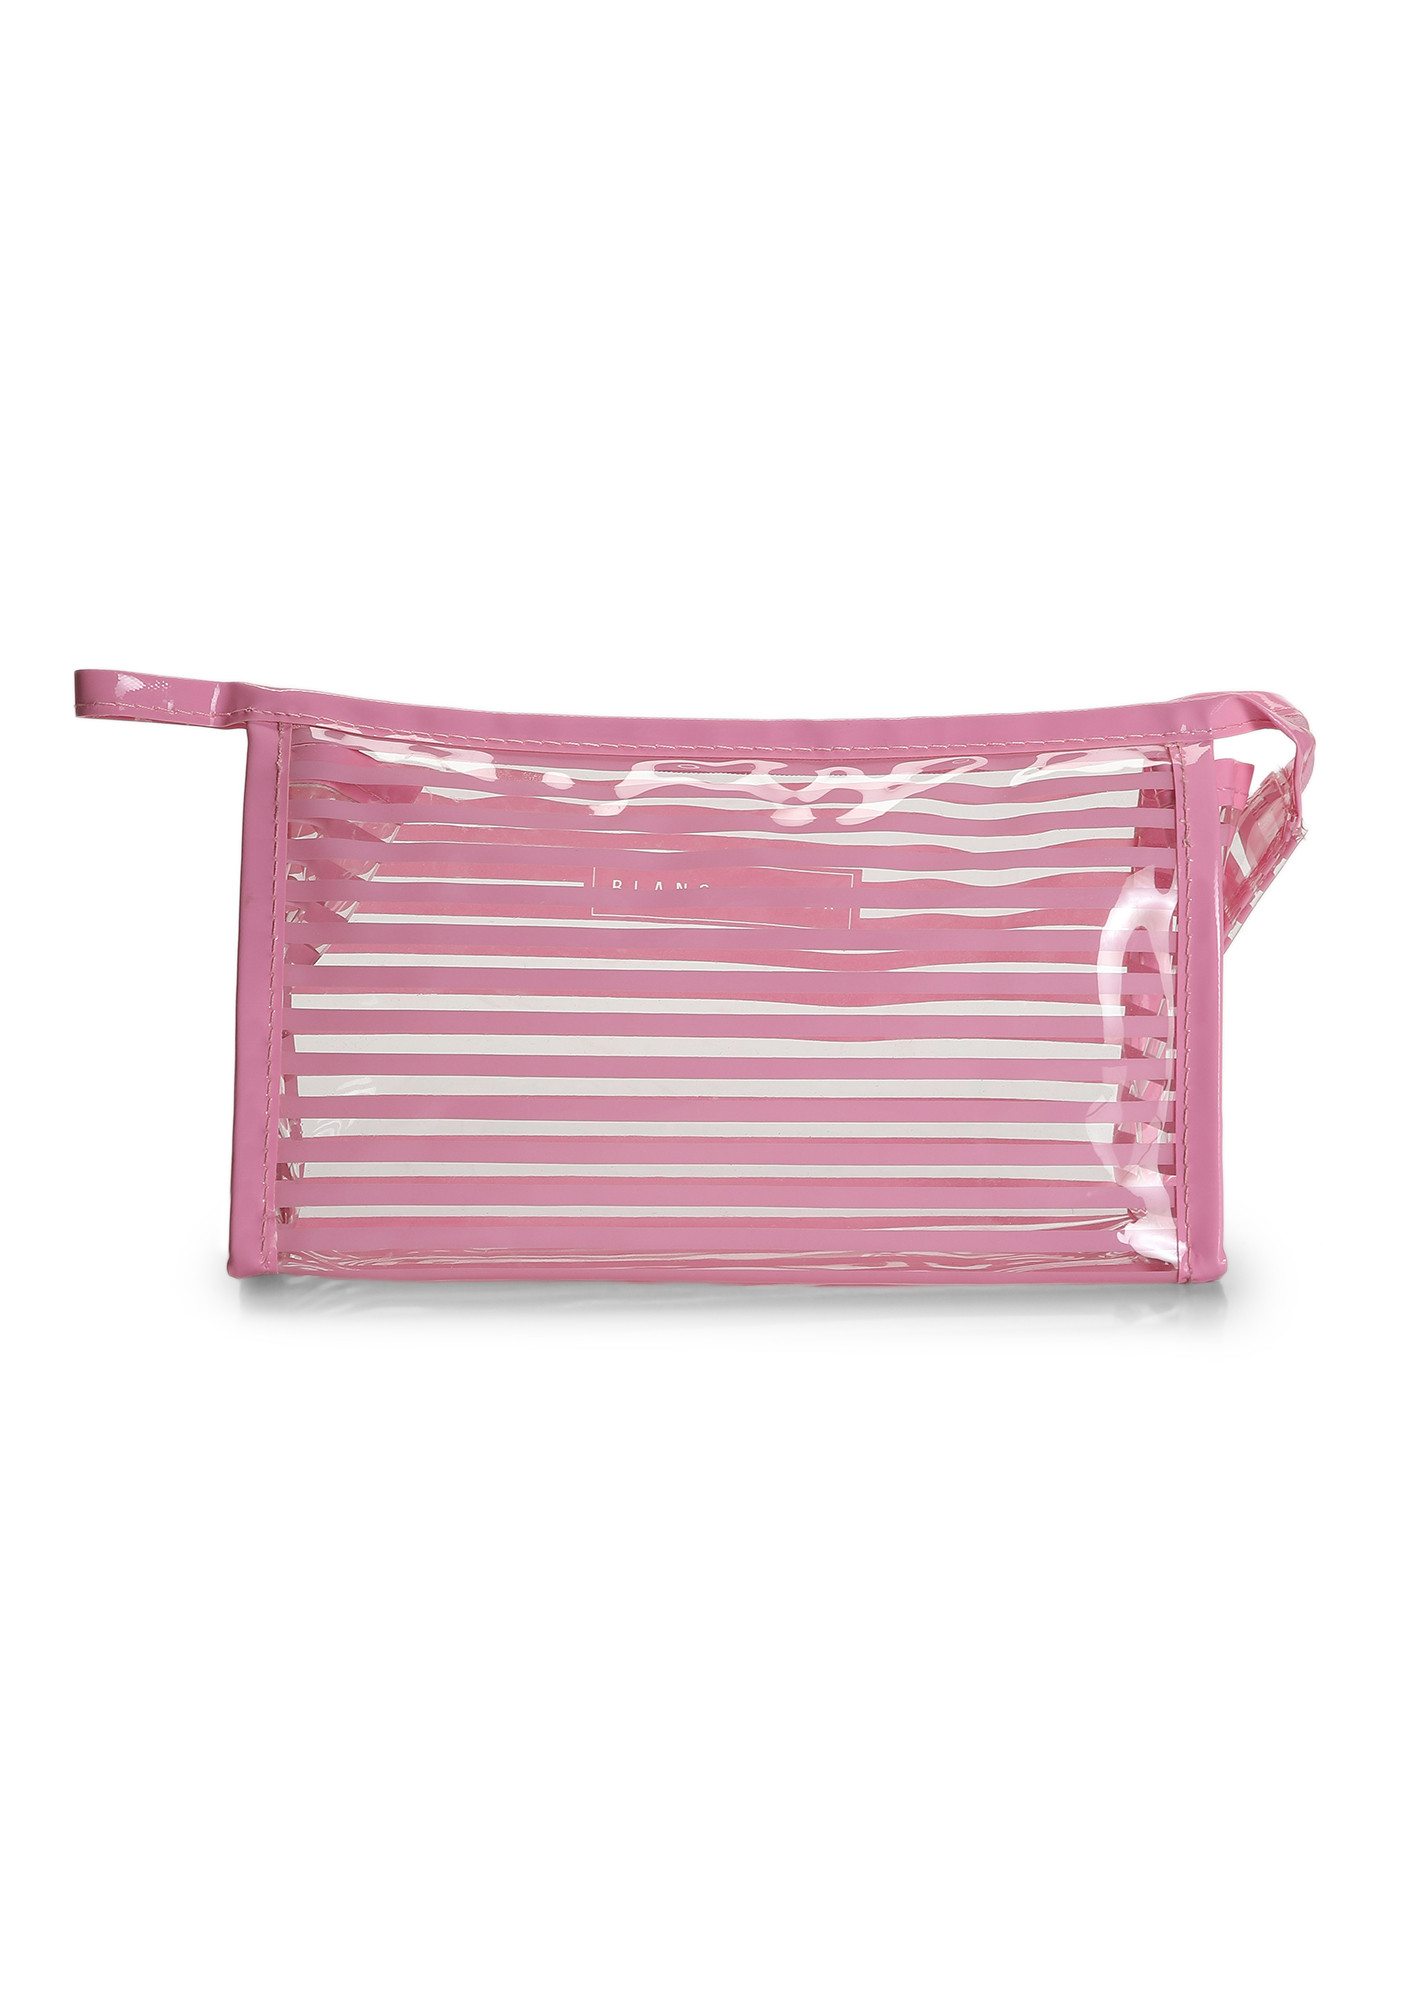 CLARITY GOALS PINK MAKE-UP POUCH 